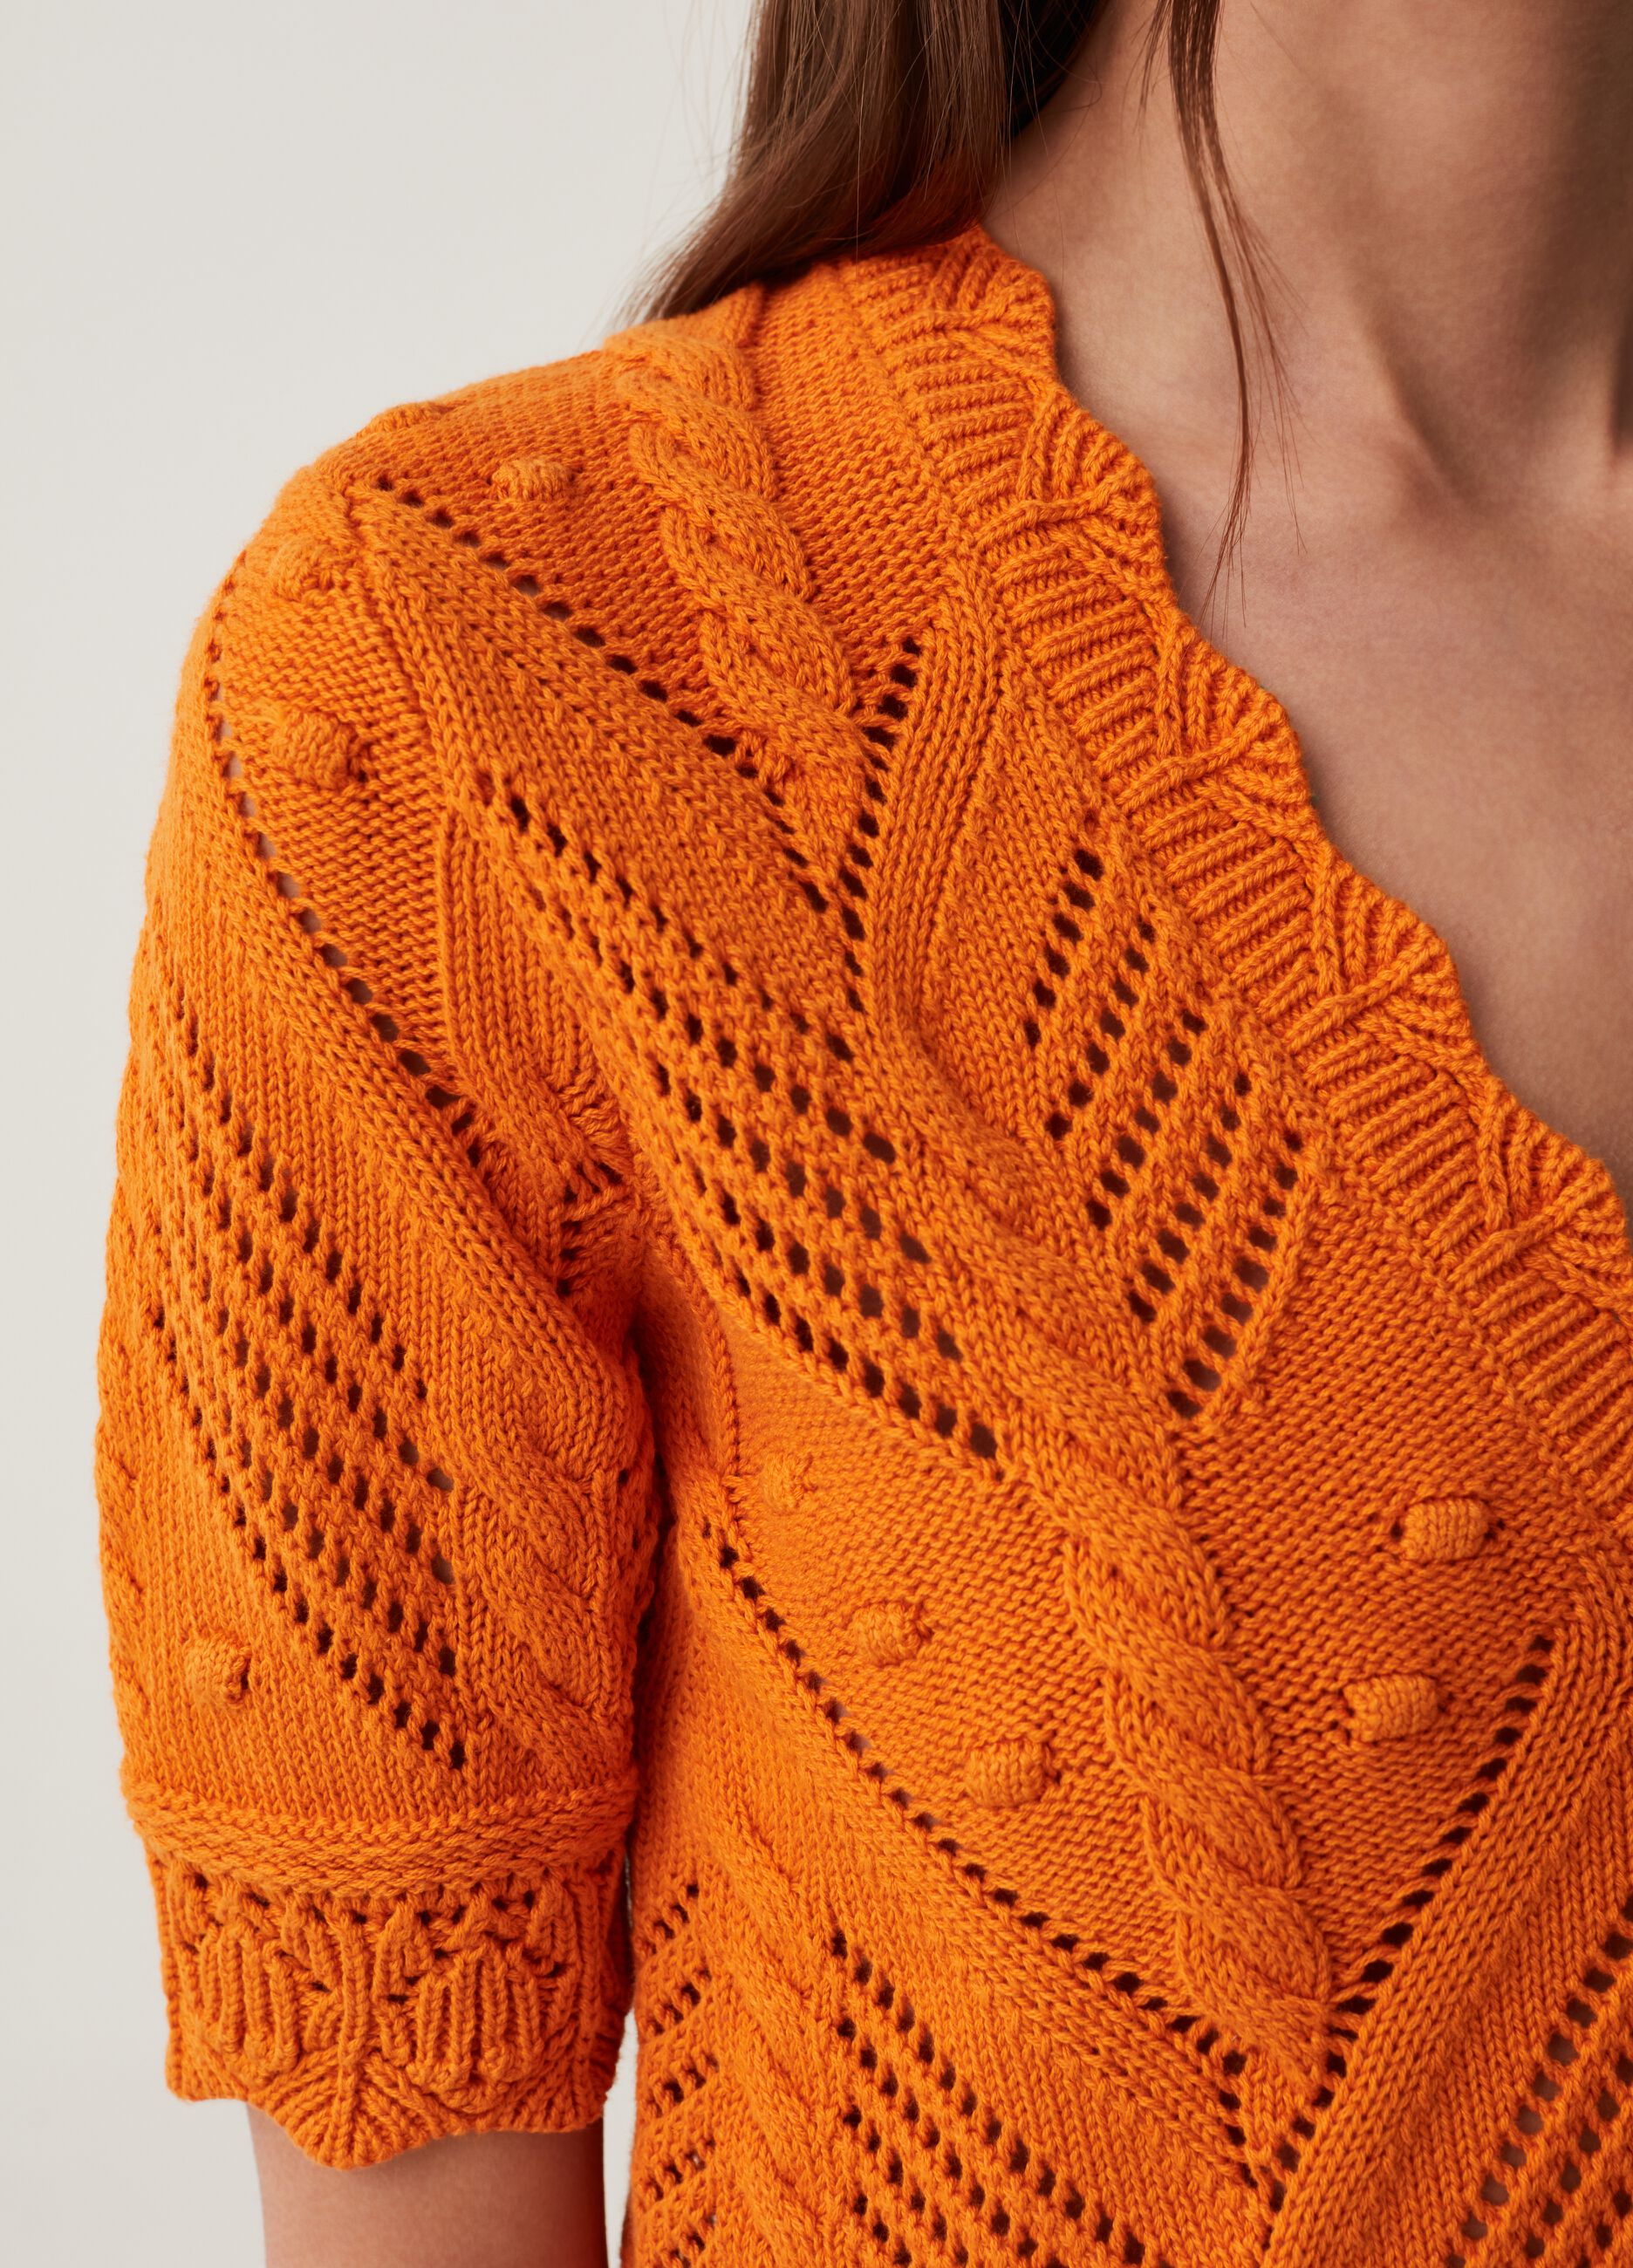 Crochet cardigan with cable detail.